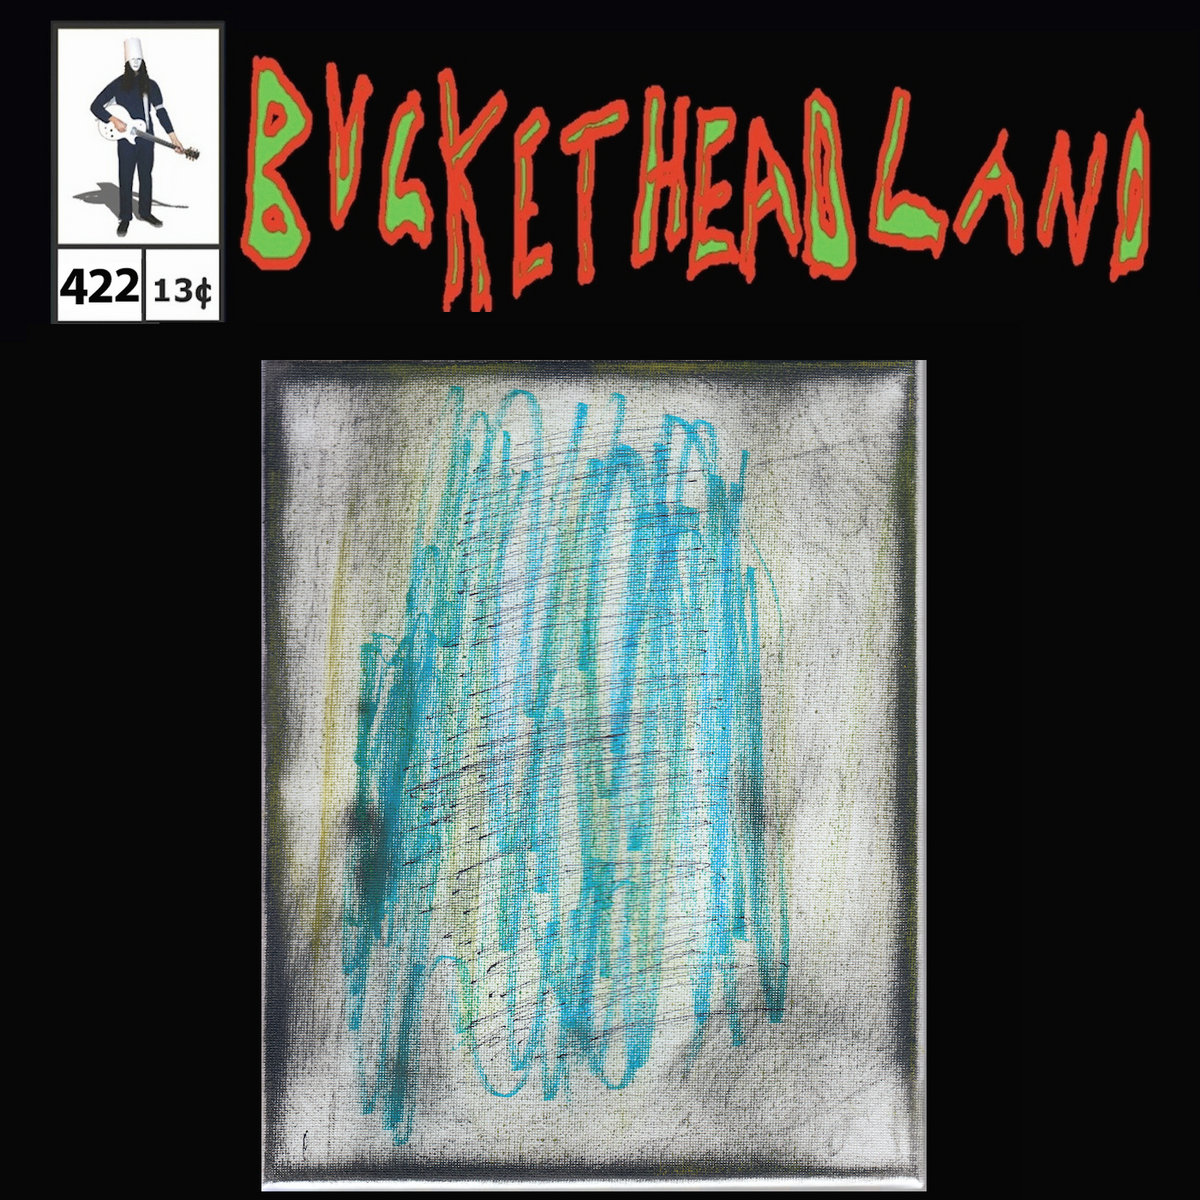 BUCKETHEAD - Pike 422 - Waters Of The Unconcious cover 